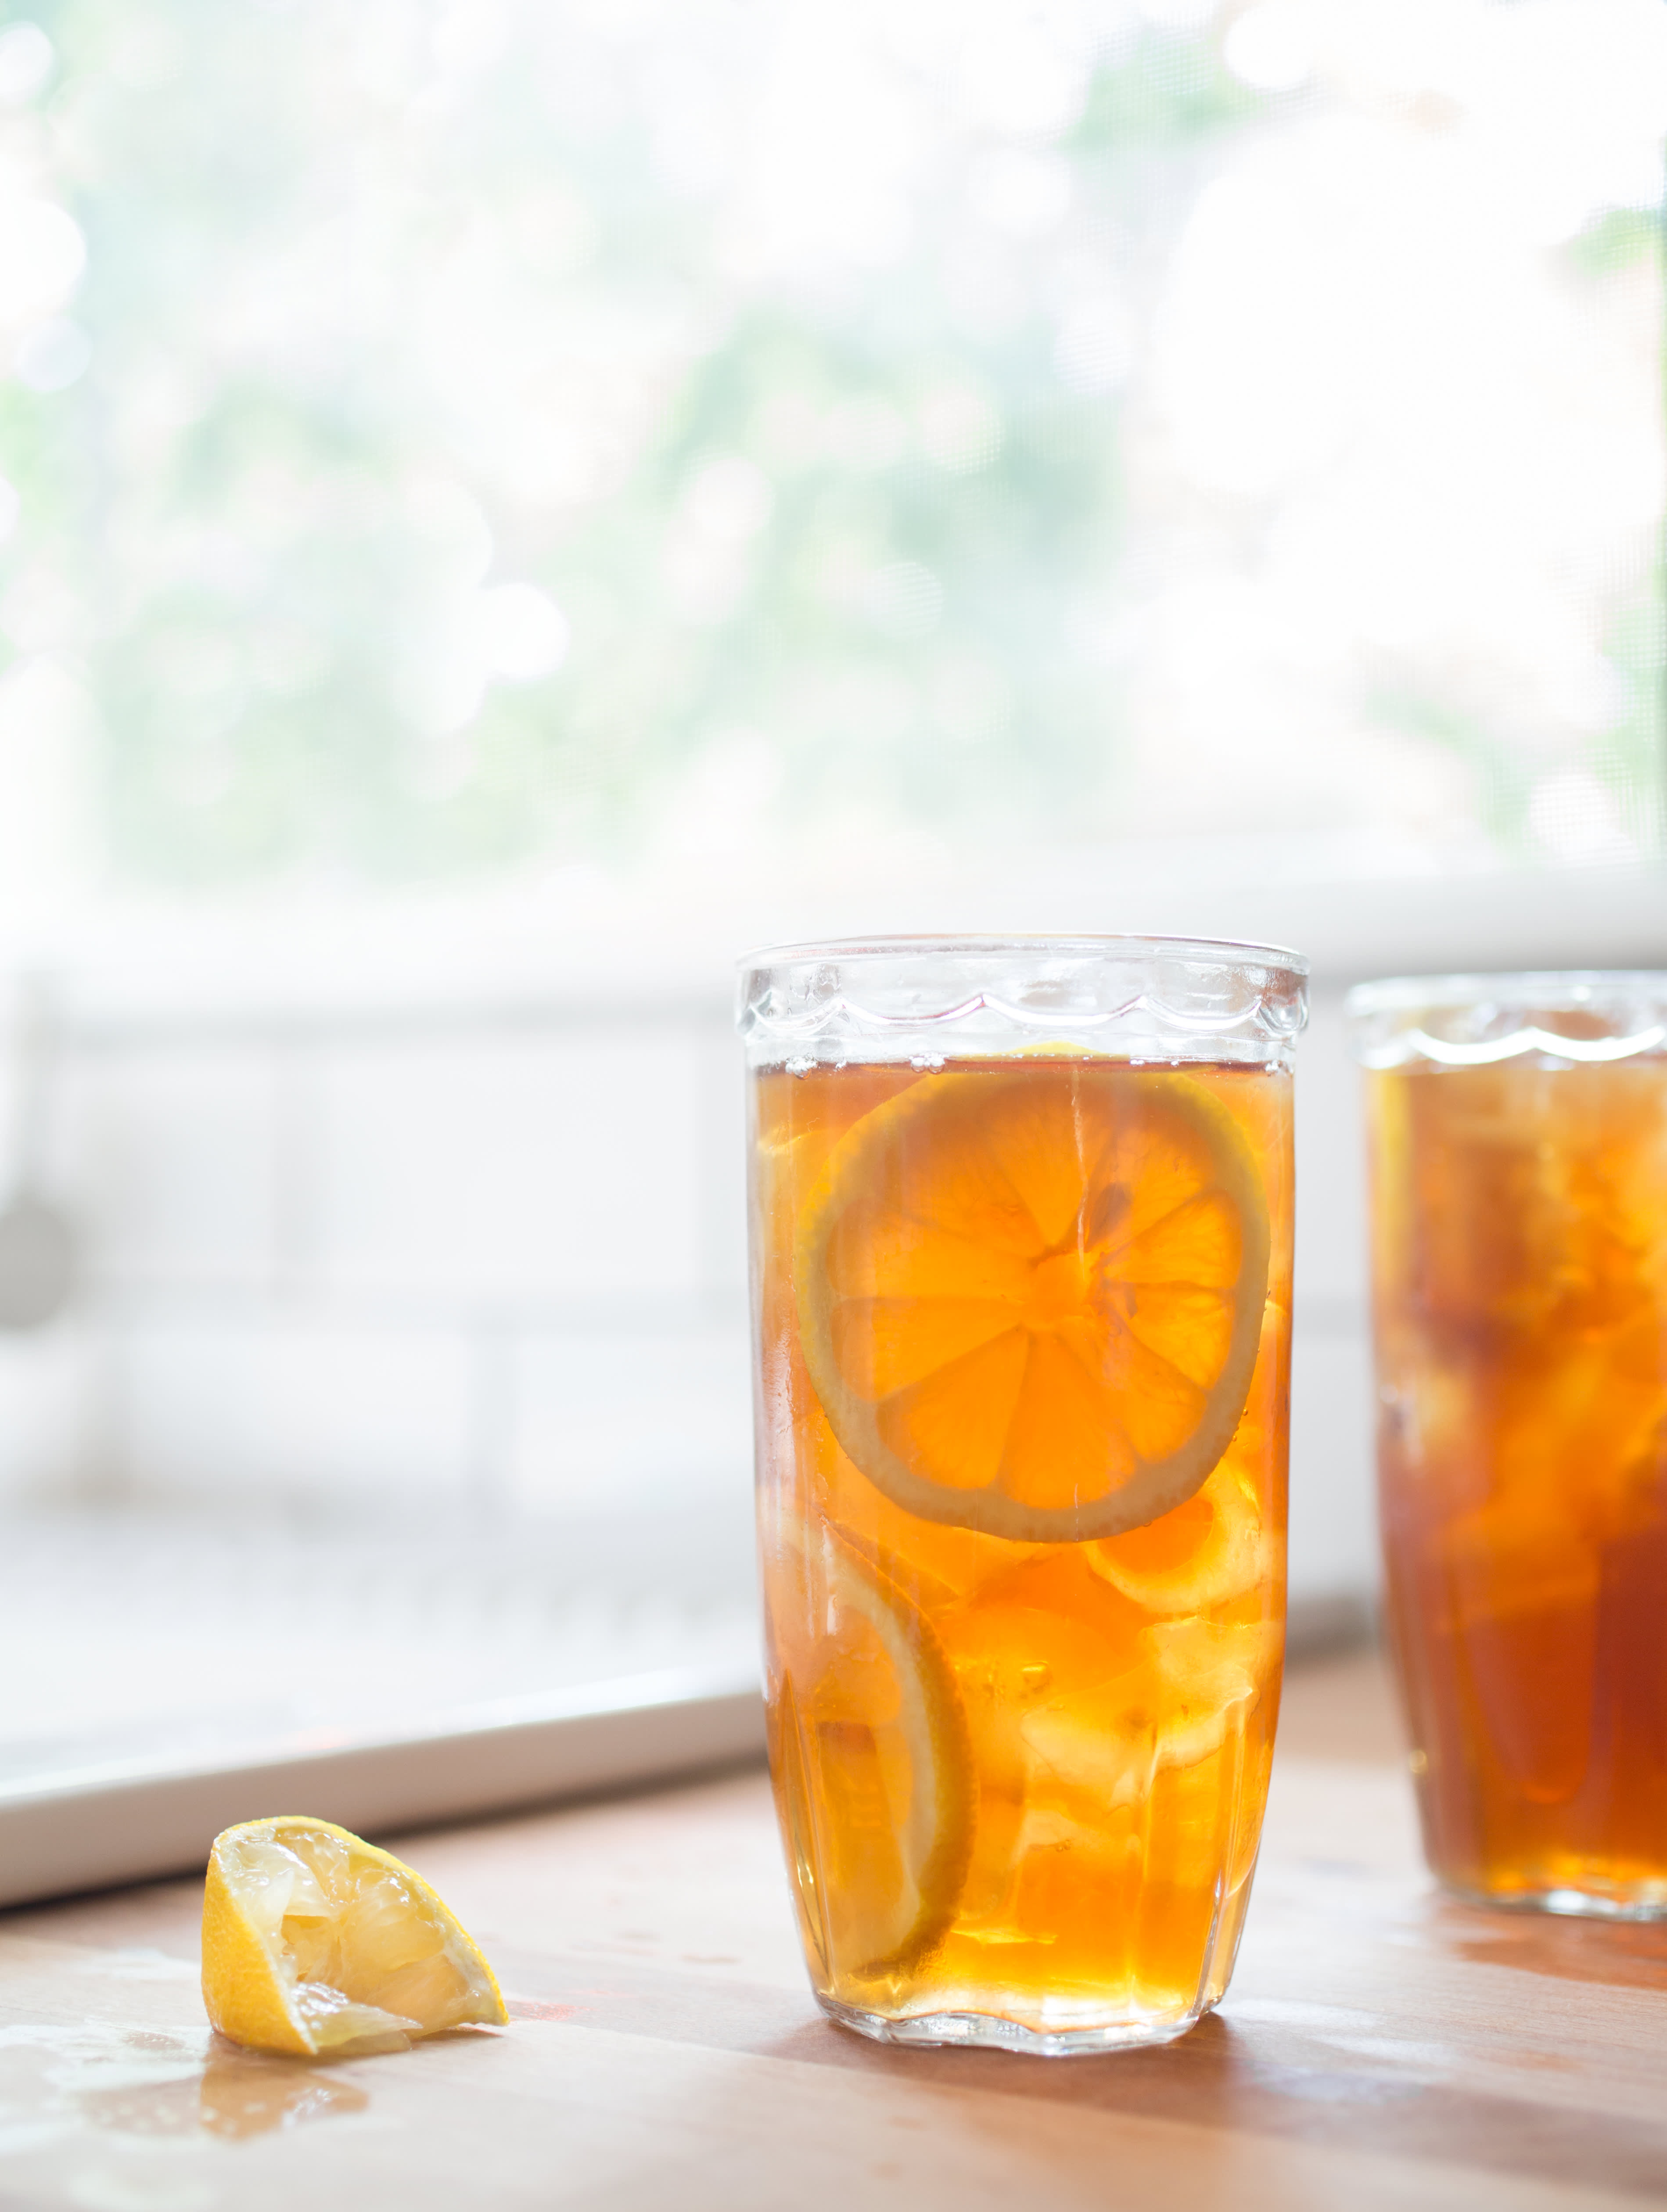 How to Make Sun Tea + Tips on How to Store and Serve It